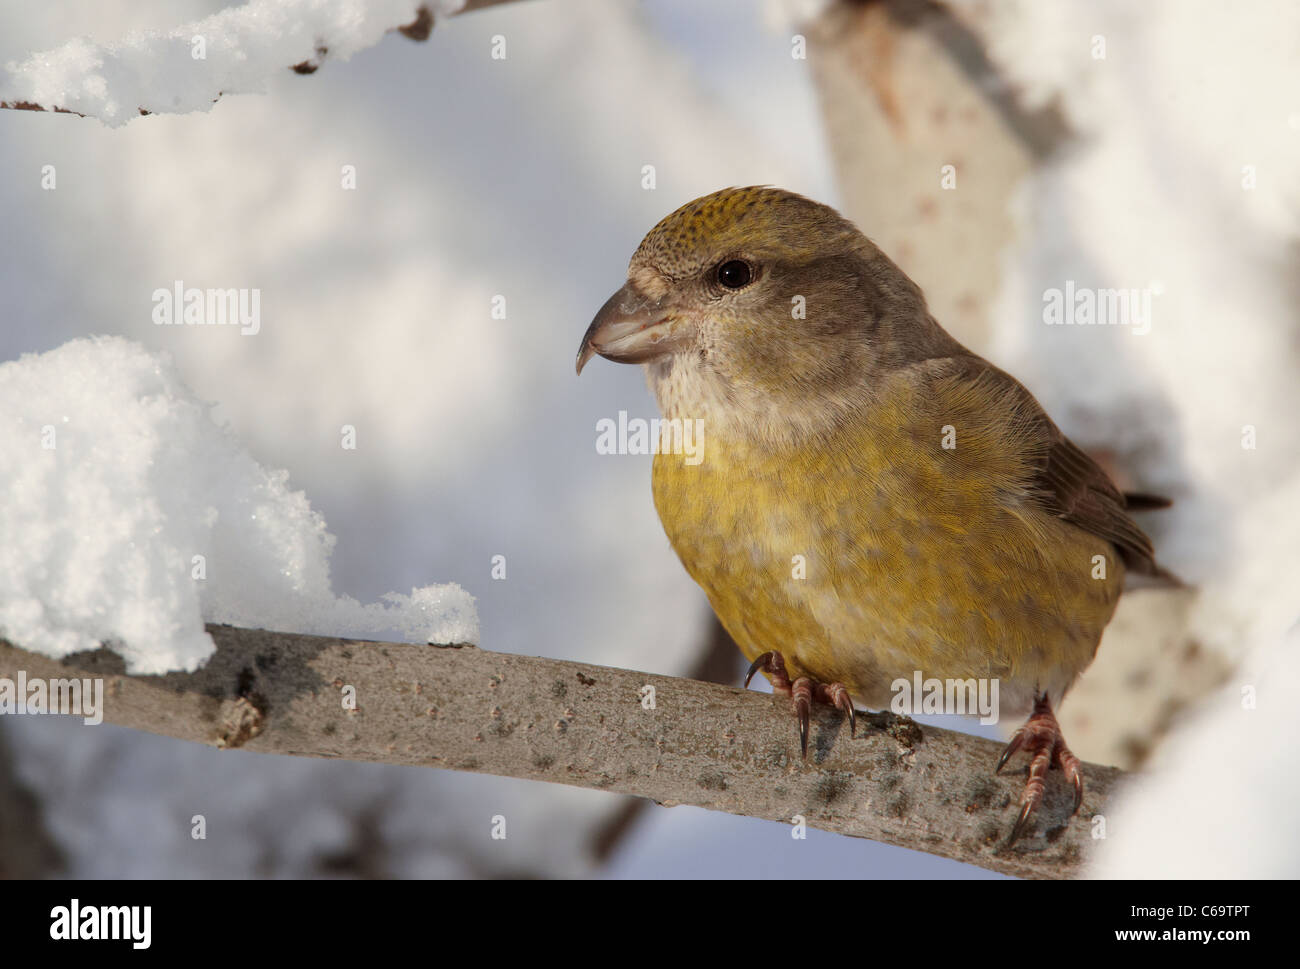 Common Crossbill, Red Crossbill (Loxia curvirostra). Female perched on a snowy twig. Stock Photo